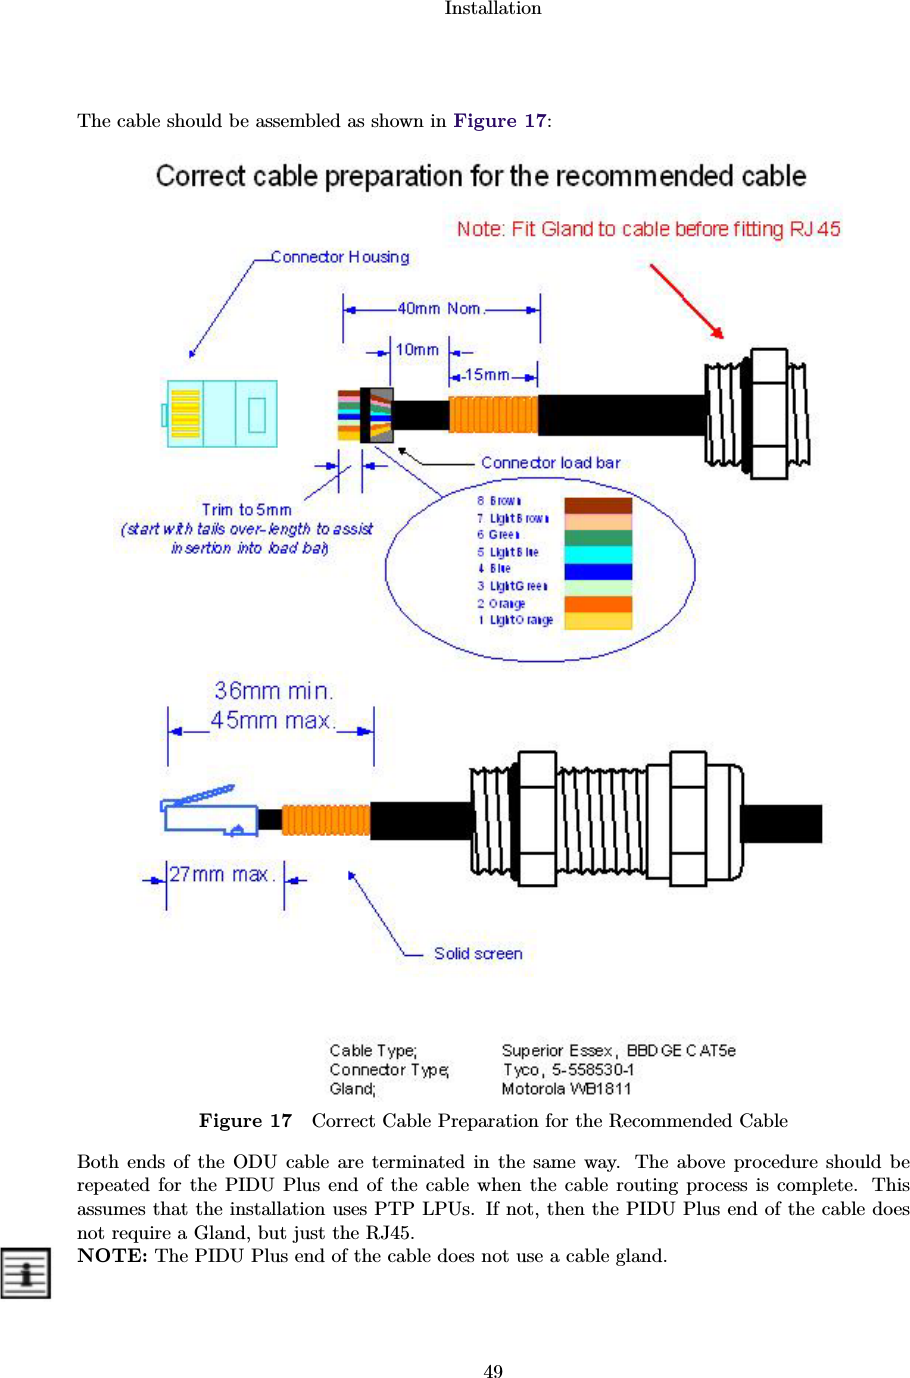 Installation49The cable should be assembled as shown in Figure 17:Figure 17 Correct Cable Preparation for the Recommended CableBoth ends of the ODU cable are terminated in the same way. The above procedure should berepeated for the PIDU Plus end of the cable when the cable routing process is complete. Thisassumes that the installation uses PTP LPUs. If not, then the PIDU Plus end of the cable doesnot require a Gland, but just the RJ45.NOTE: The PIDU Plus end of the cable does not use a cable gland.